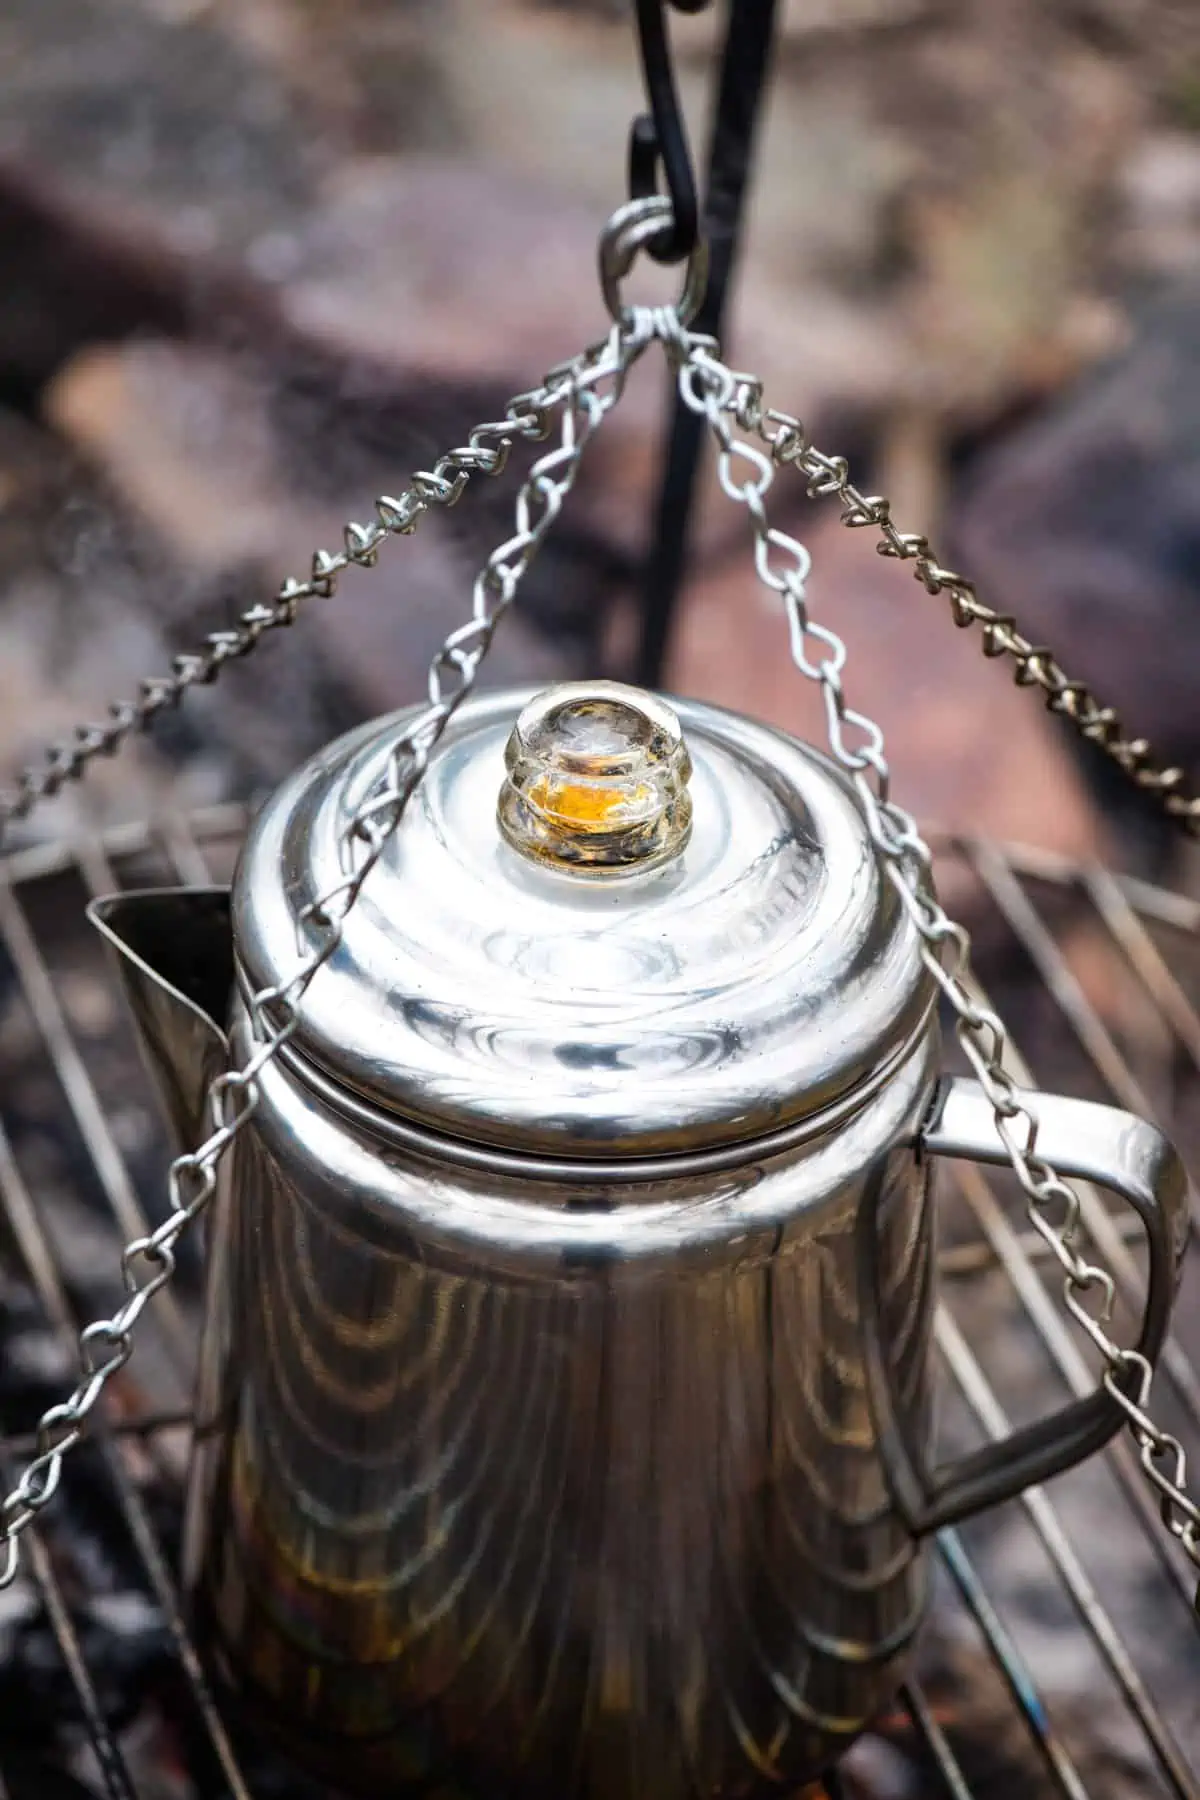 coffee percolating in the glass knob of a stainless steel camping percolator